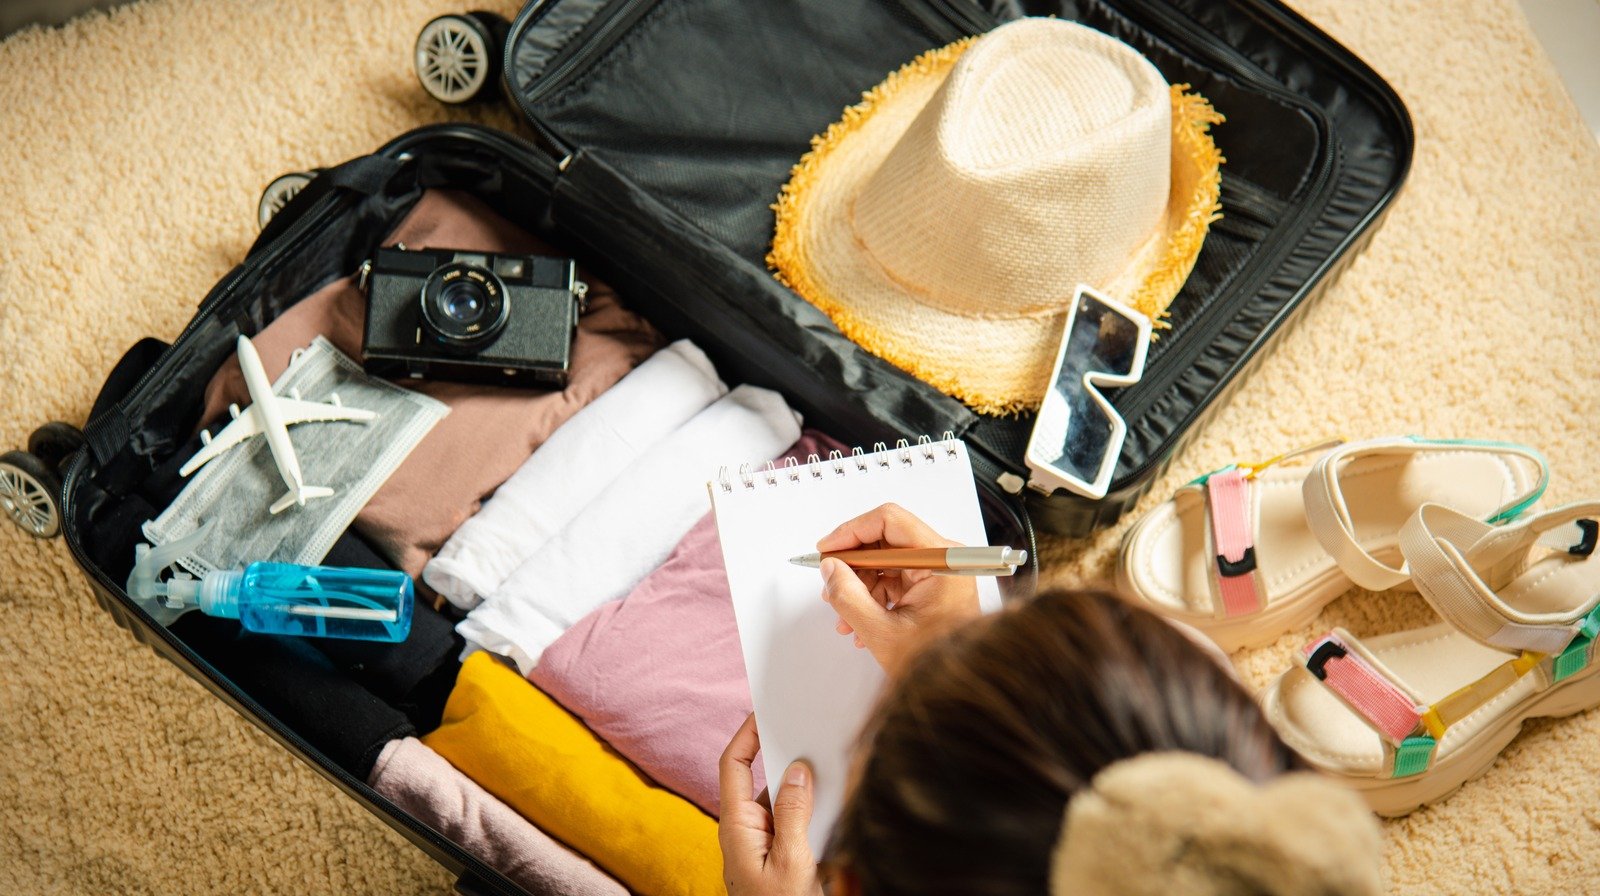 The 5 Popular Carry-On Items You Should Leave Home